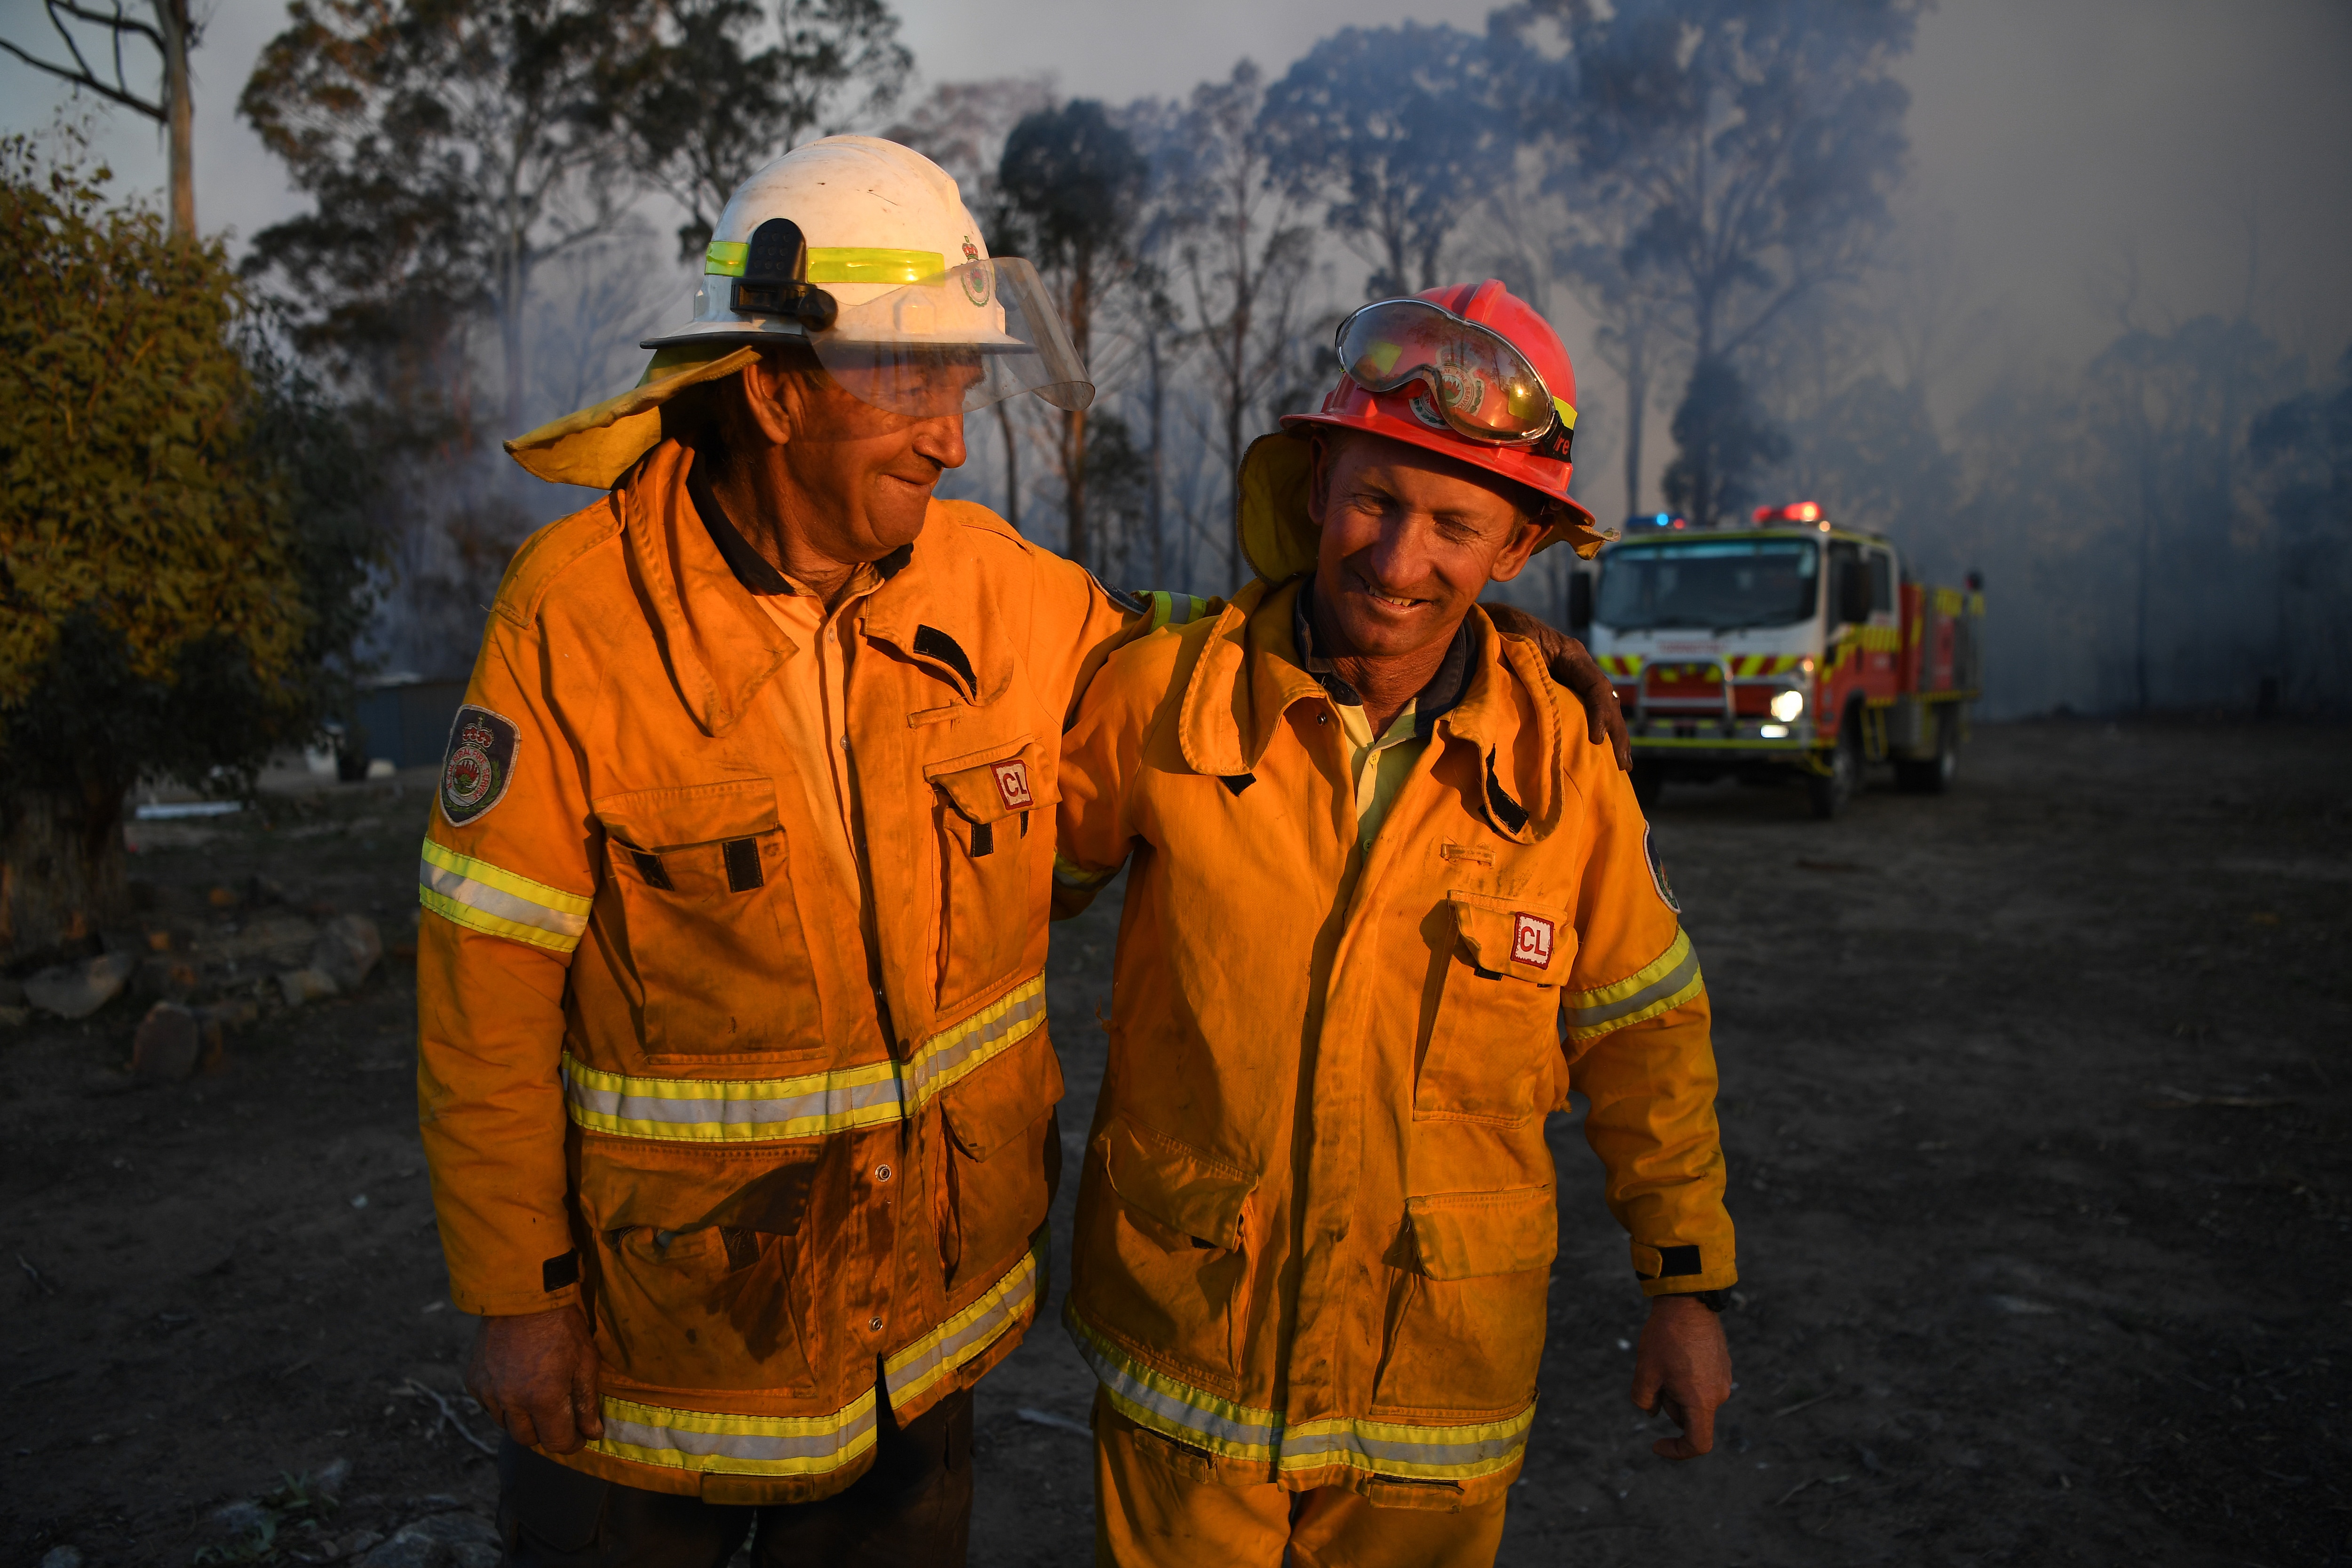 NSW Rural Fire Service volunteers Bob (left) and Greg Kneipp, a father and son, embrace after successfully defending a property in Torrington, near Glen Innes.